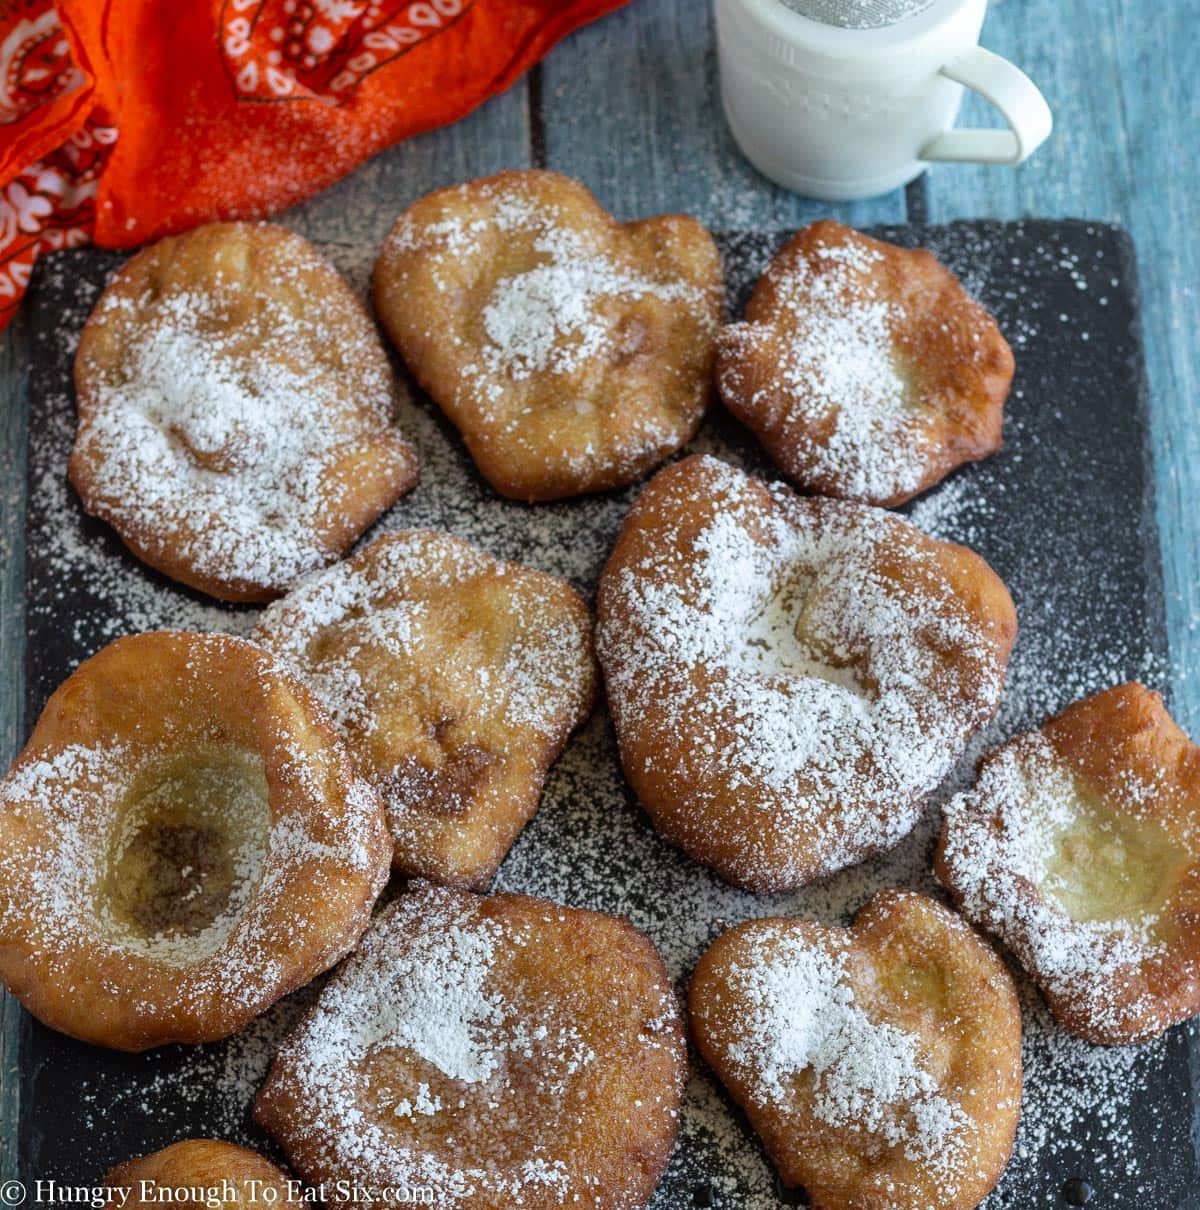 Black slate board with fried dough and all dusted with powdered sugar